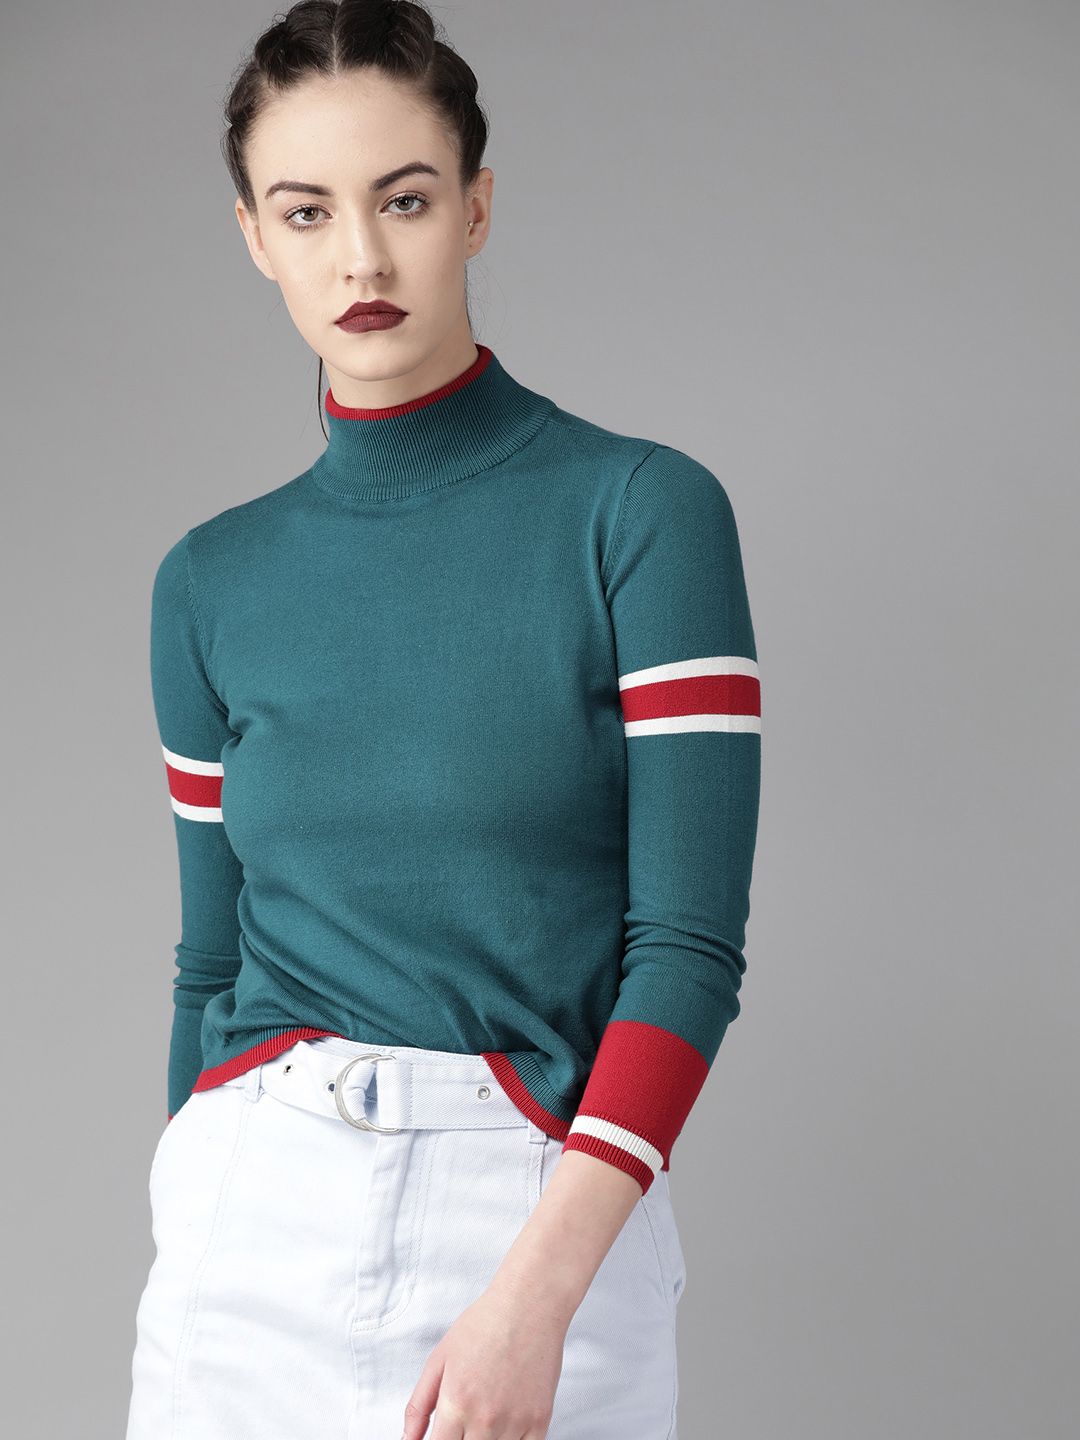 The Roadster Lifestyle Co Women Teal Blue Solid Sweater Price in India